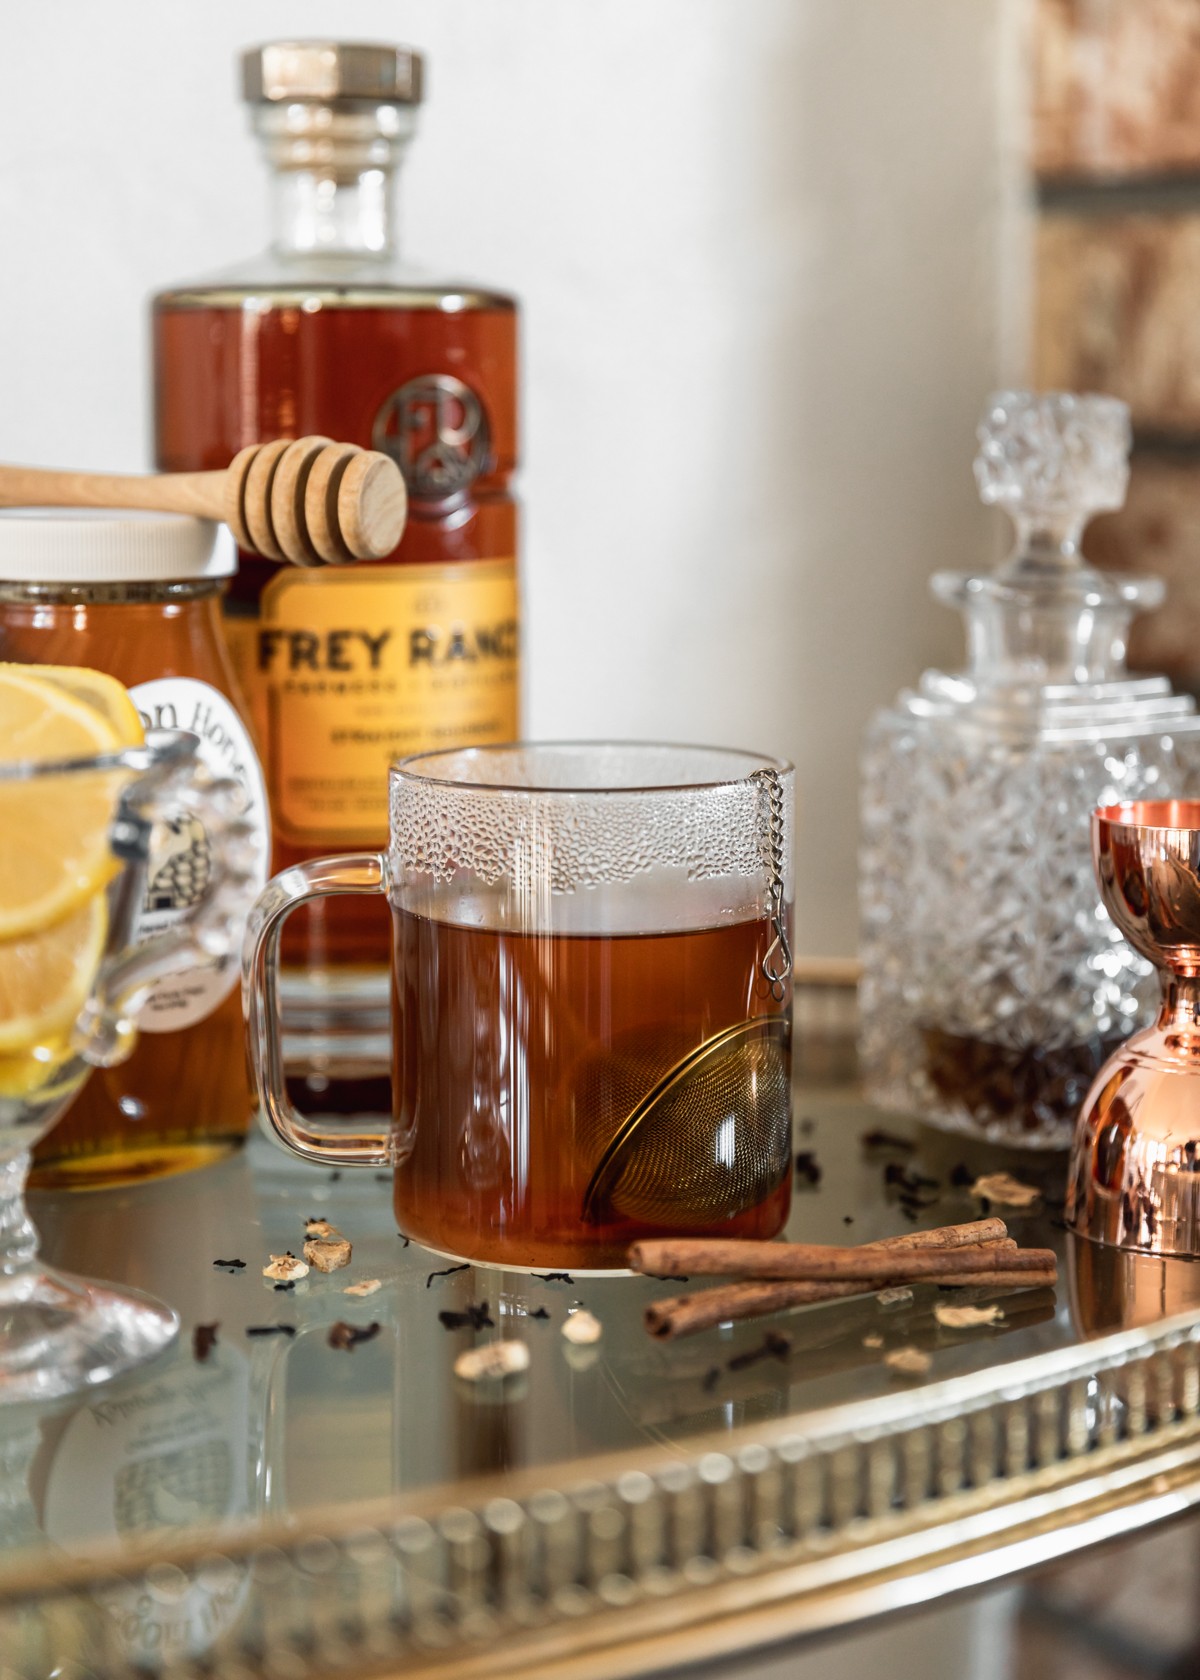 A side image of a cup of black tea in a glass mug on a bar cart next to a bottle of bourbon, jar of honey, white glass of lemon slices, shot, glass, and cinnamon sticks.